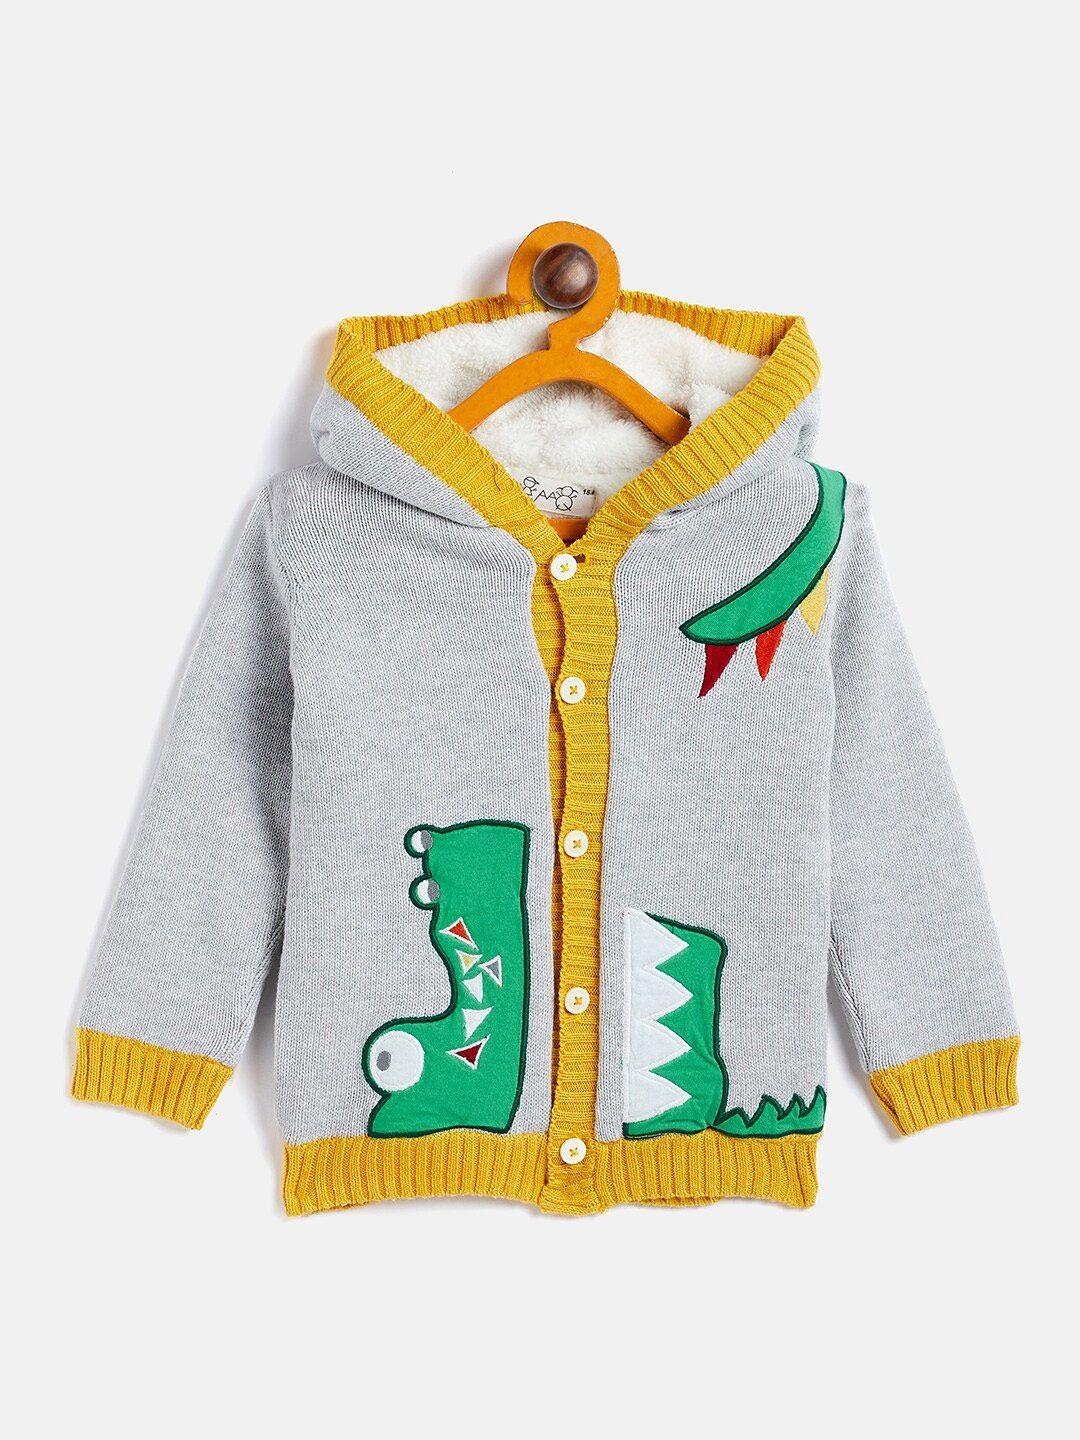 wildlinggs-infants-graphic-printed-hooded-pure-cotton-cardigan-sweater